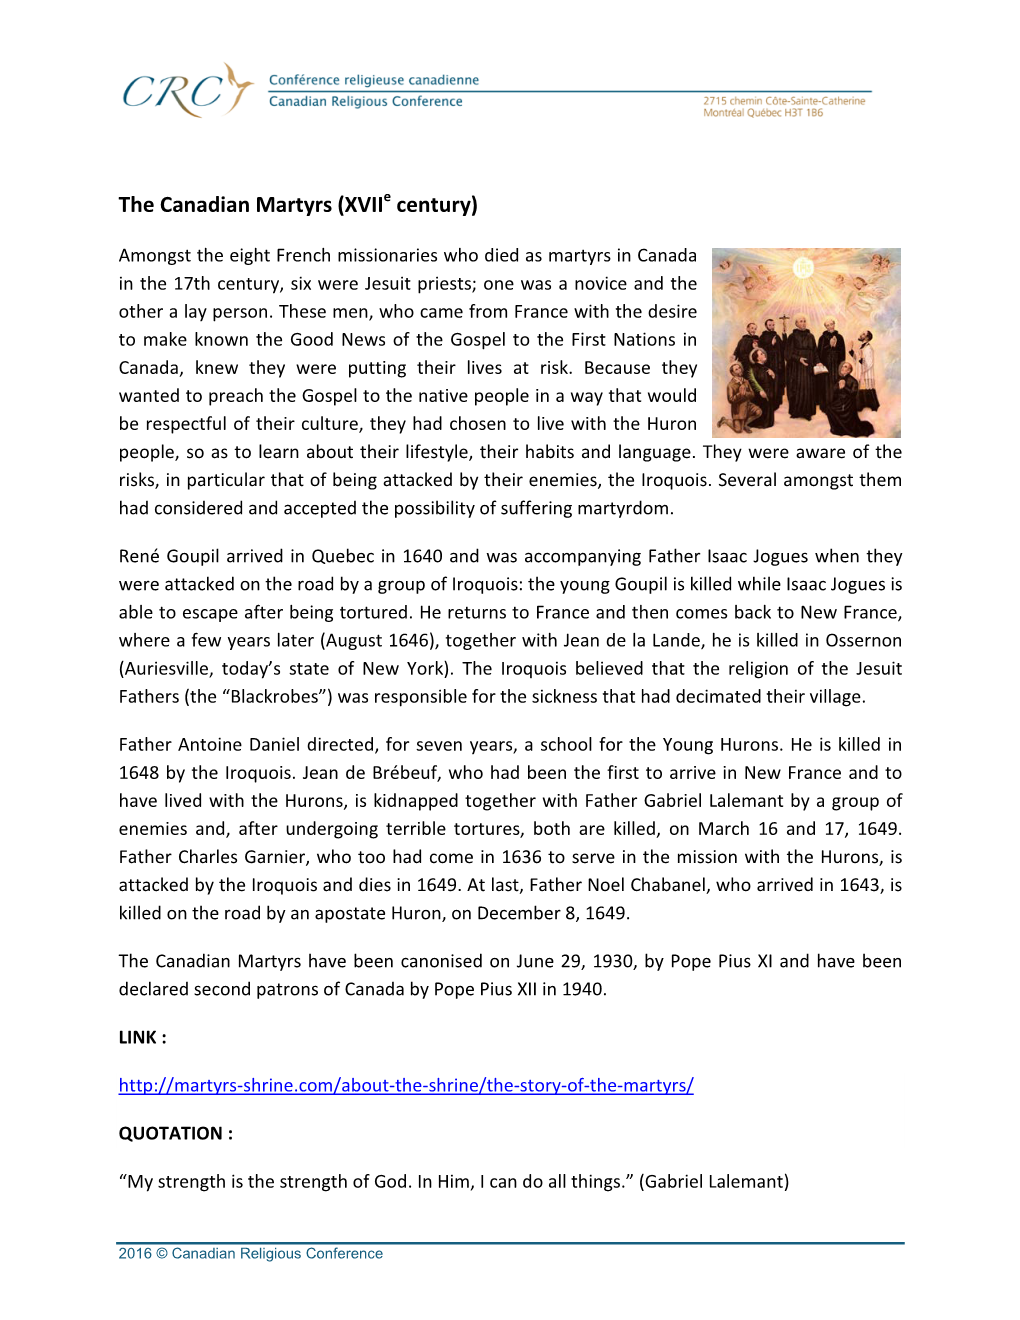 The Canadian Martyrs (Xviie Century)